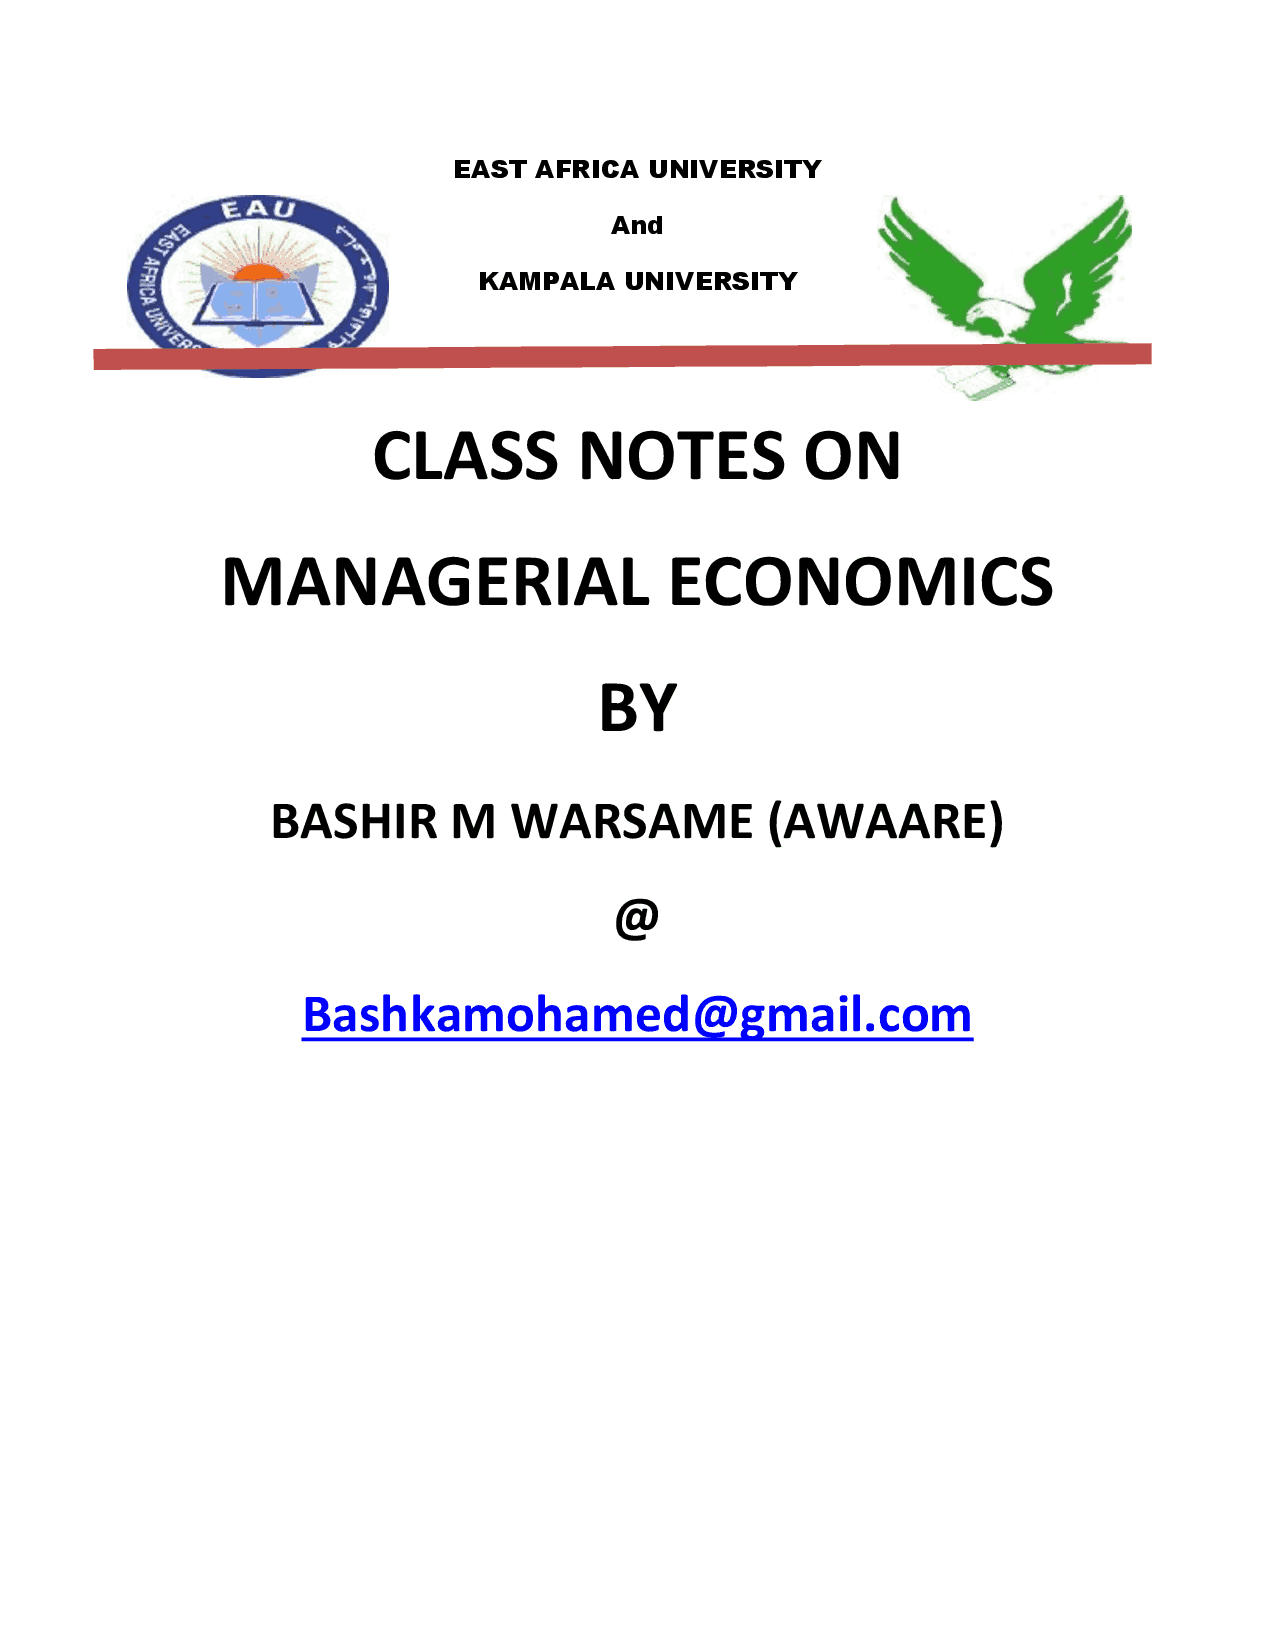 A note on microeconomics for strategists pdf